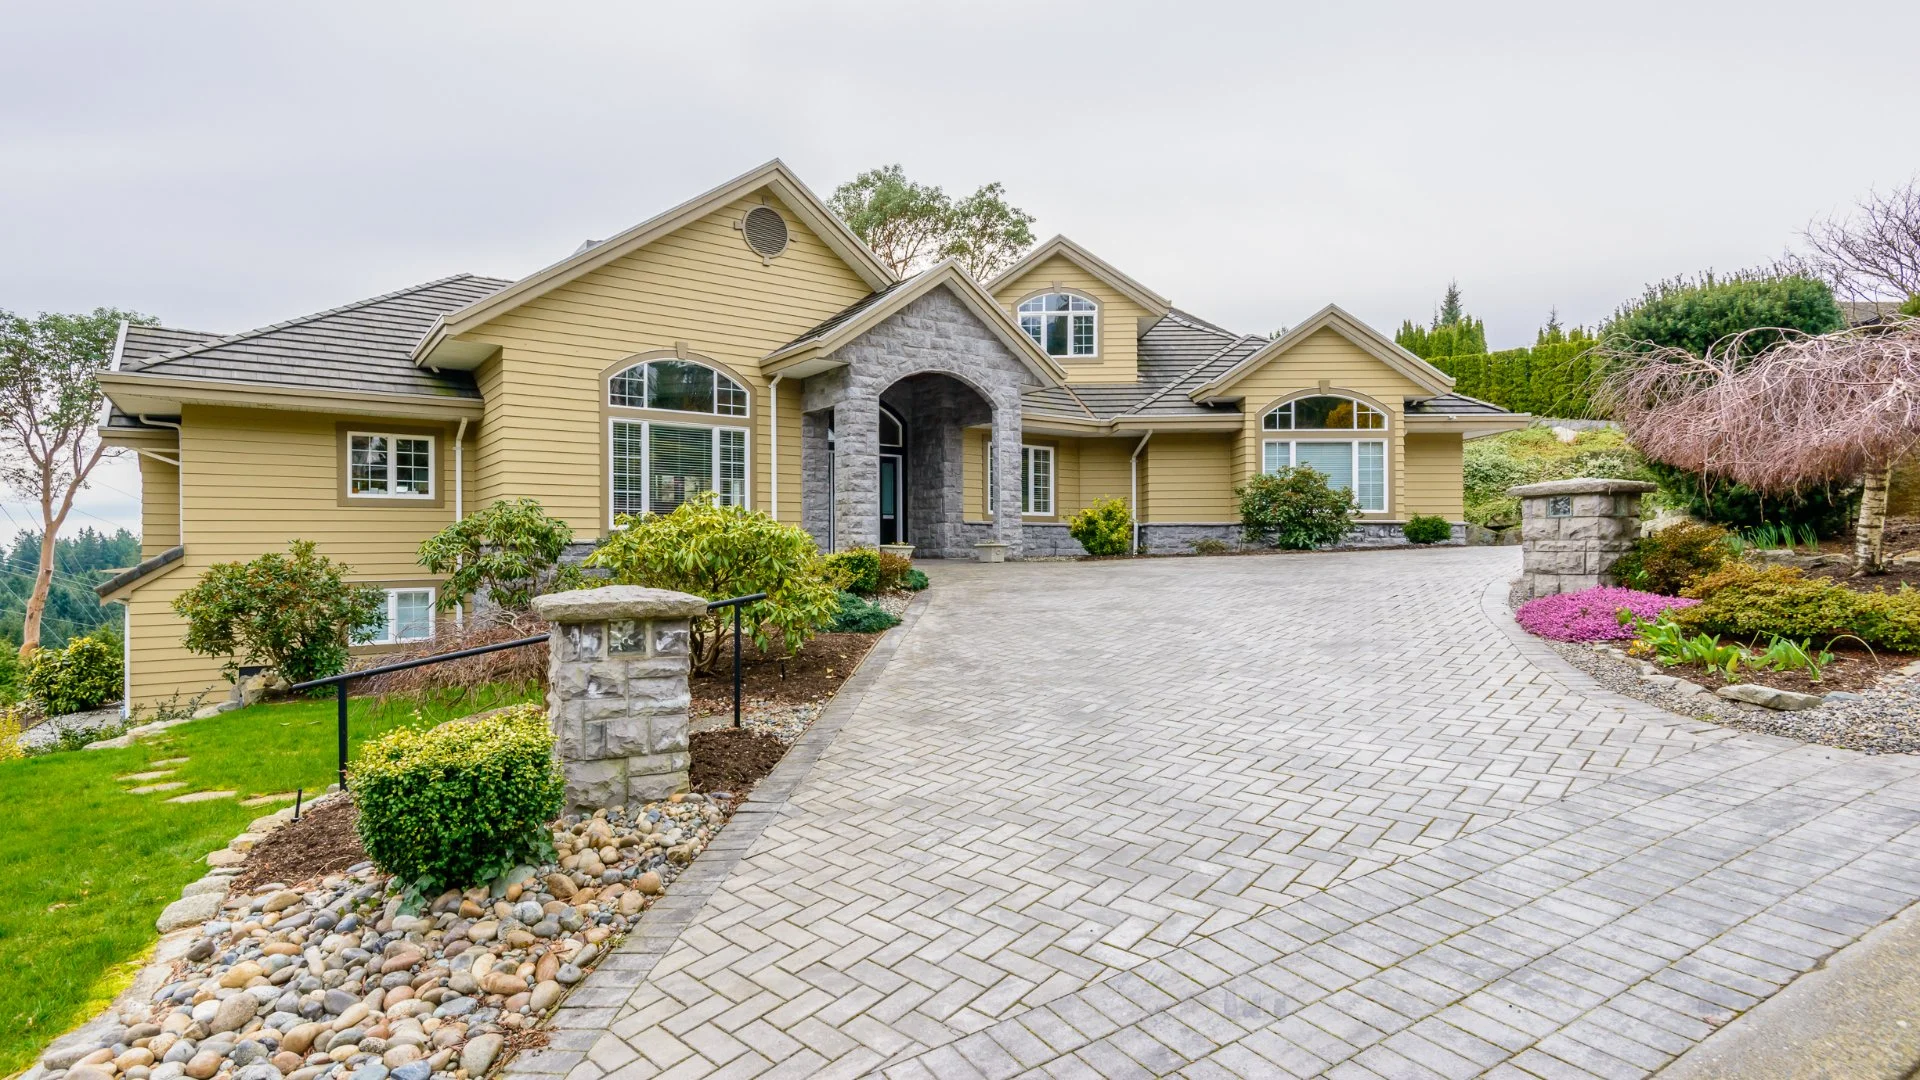 3 Reasons Why You Should Say Goodbye to Concrete Driveways & Opt for Pavers